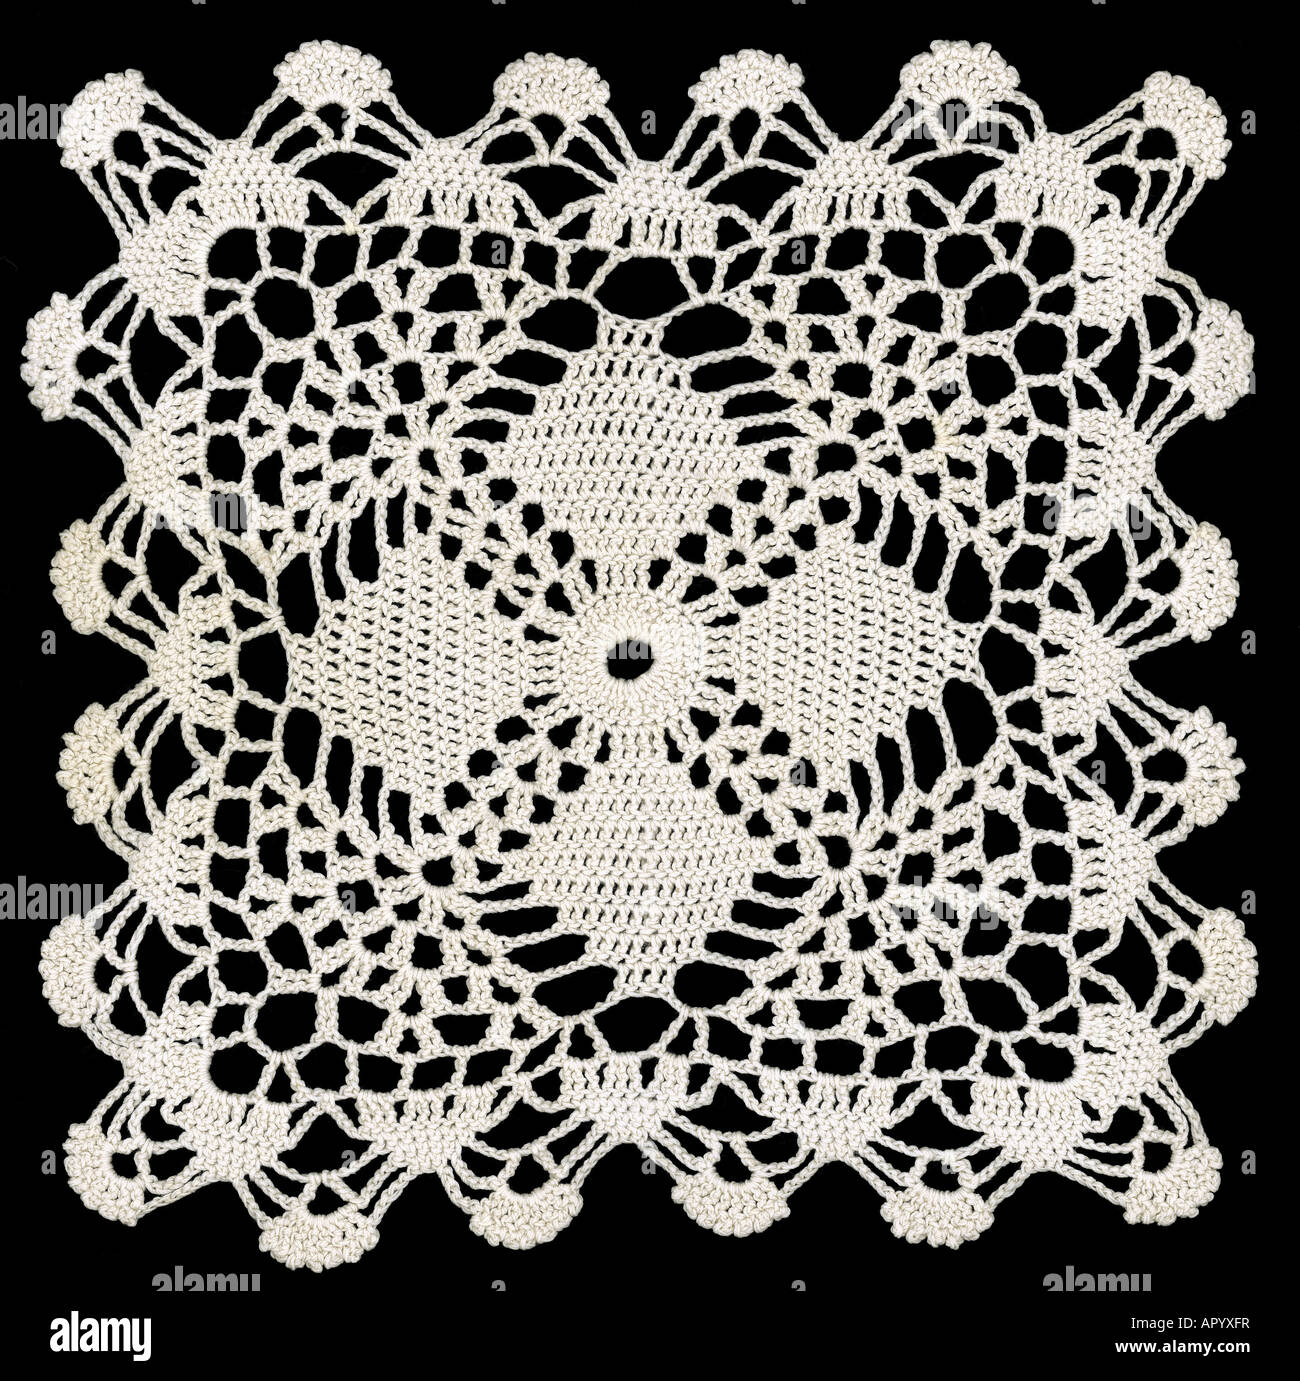 Knotted retro lace pattern on black cutout background Stock Photo